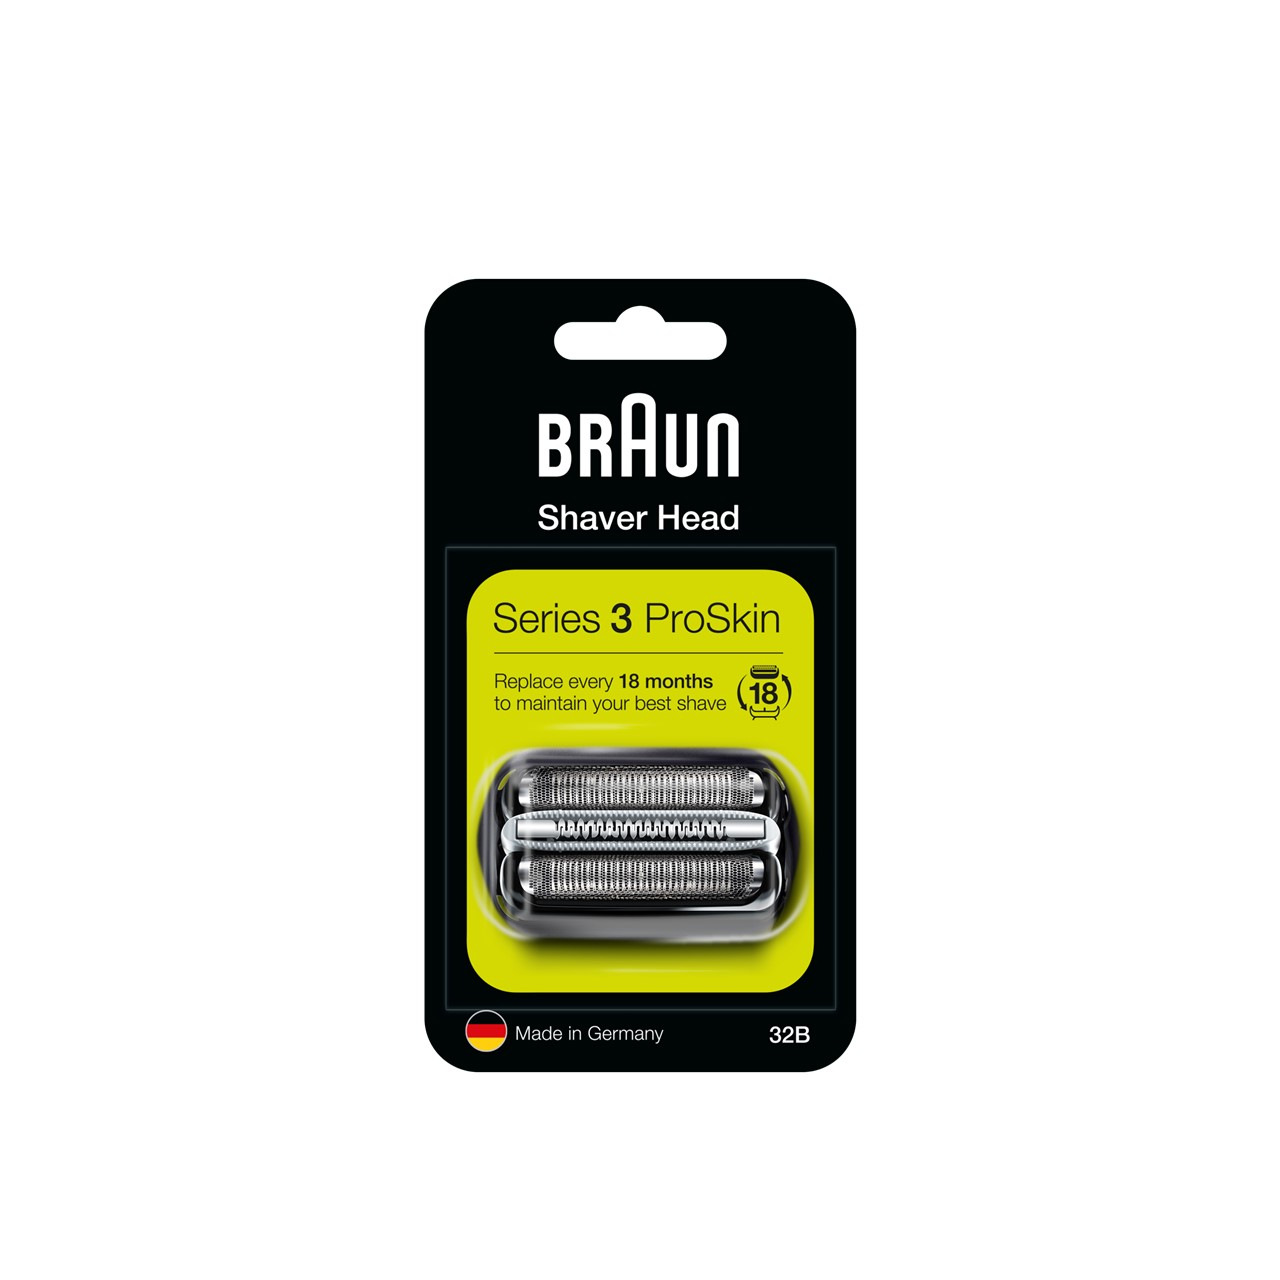 https://static.beautytocare.com/media/catalog/product/b/r/braun-series-3-proskin-electric-shaver-replacement-head-32b.jpg